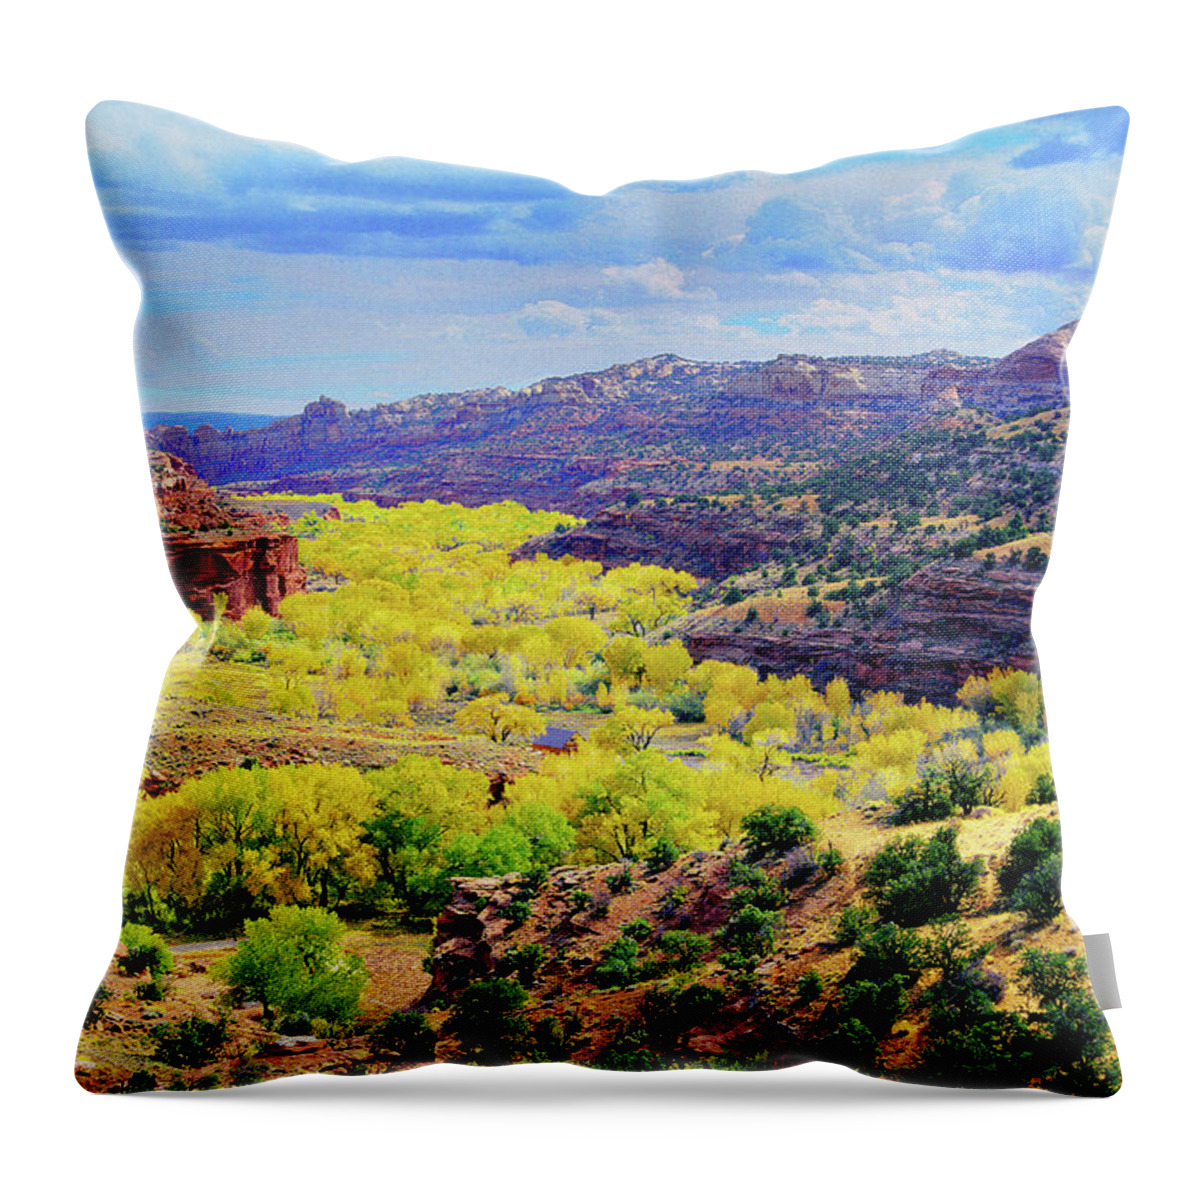 Utah Throw Pillow featuring the photograph Escalante Canyon by Frank Houck